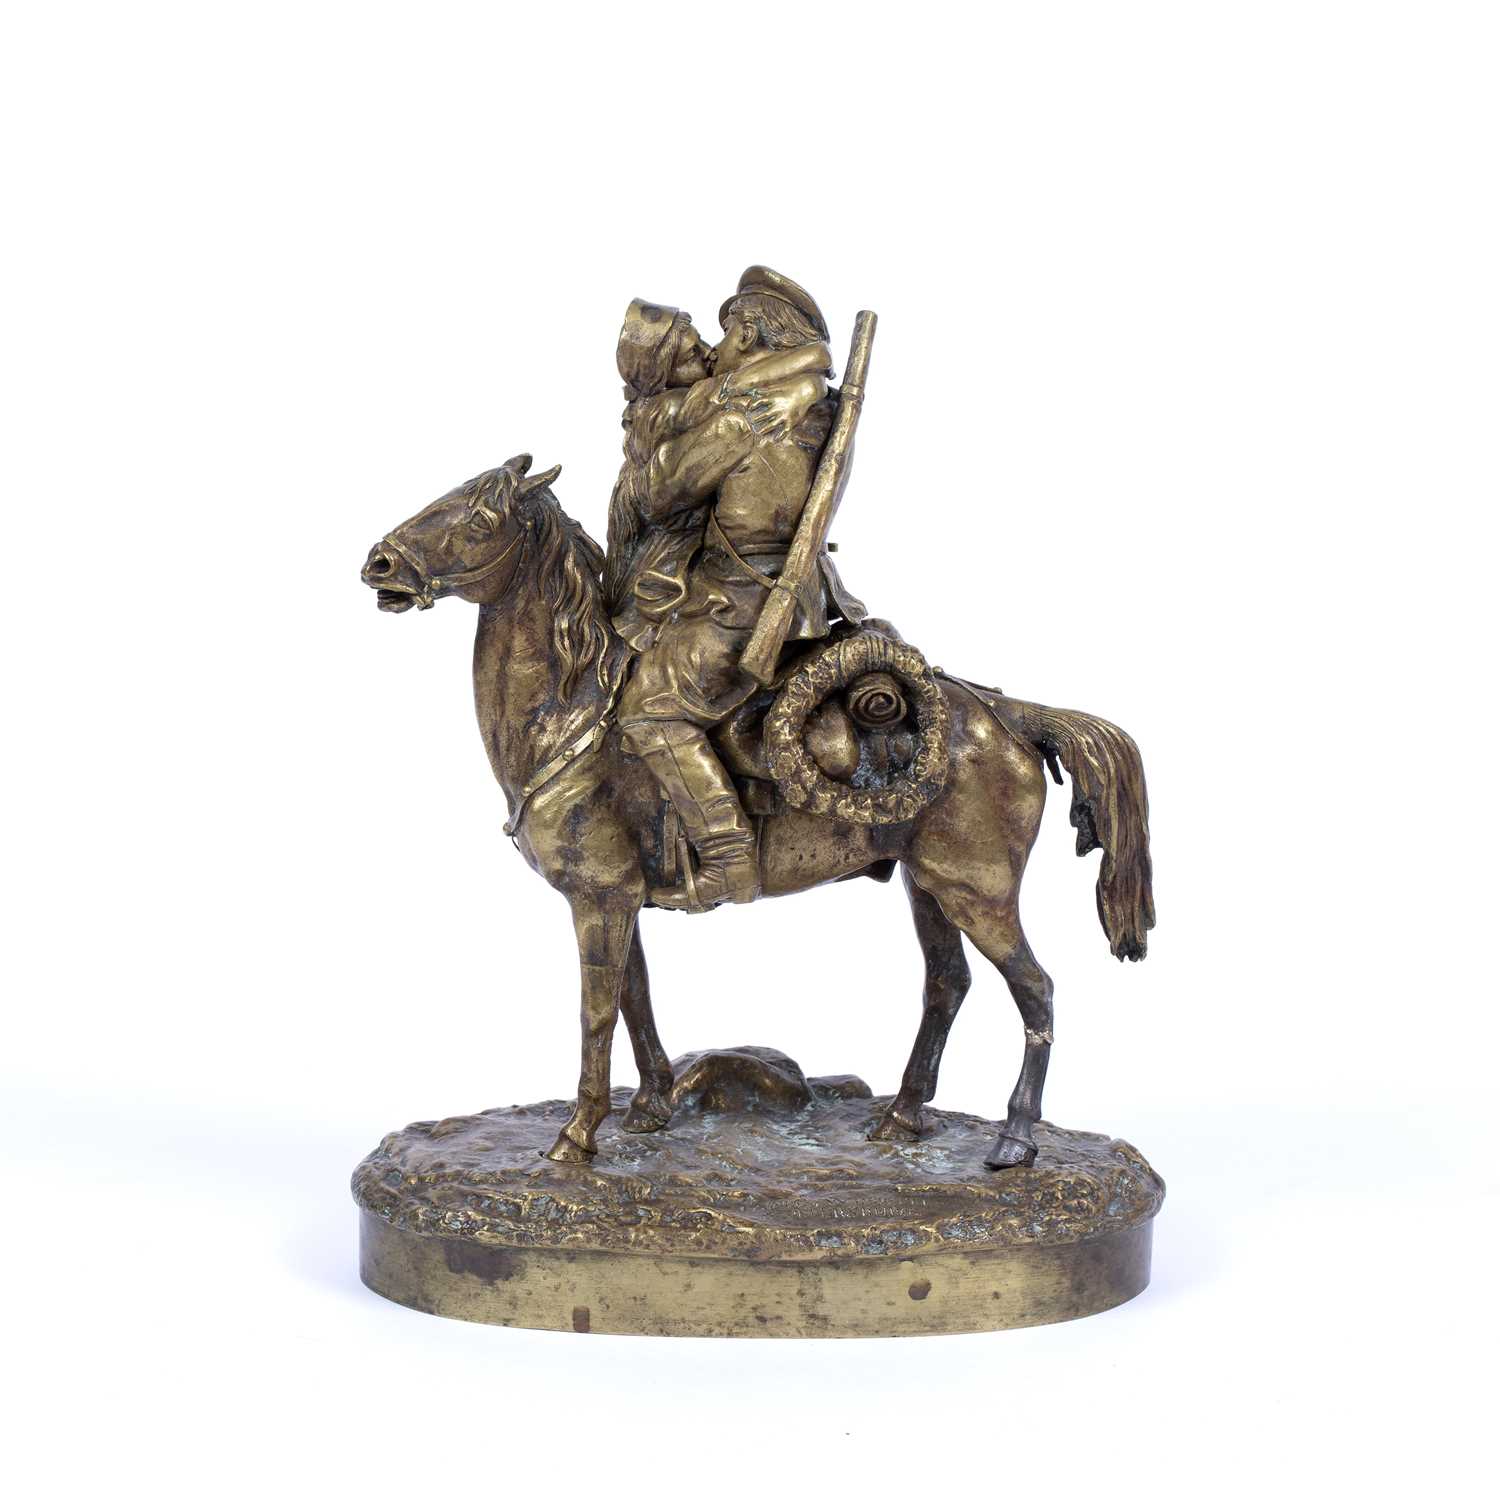 After Vassily Yakovlevitch Gratchev (1831-1905) - A Russian bronze equestrian figure group 'Farewell - Image 2 of 3